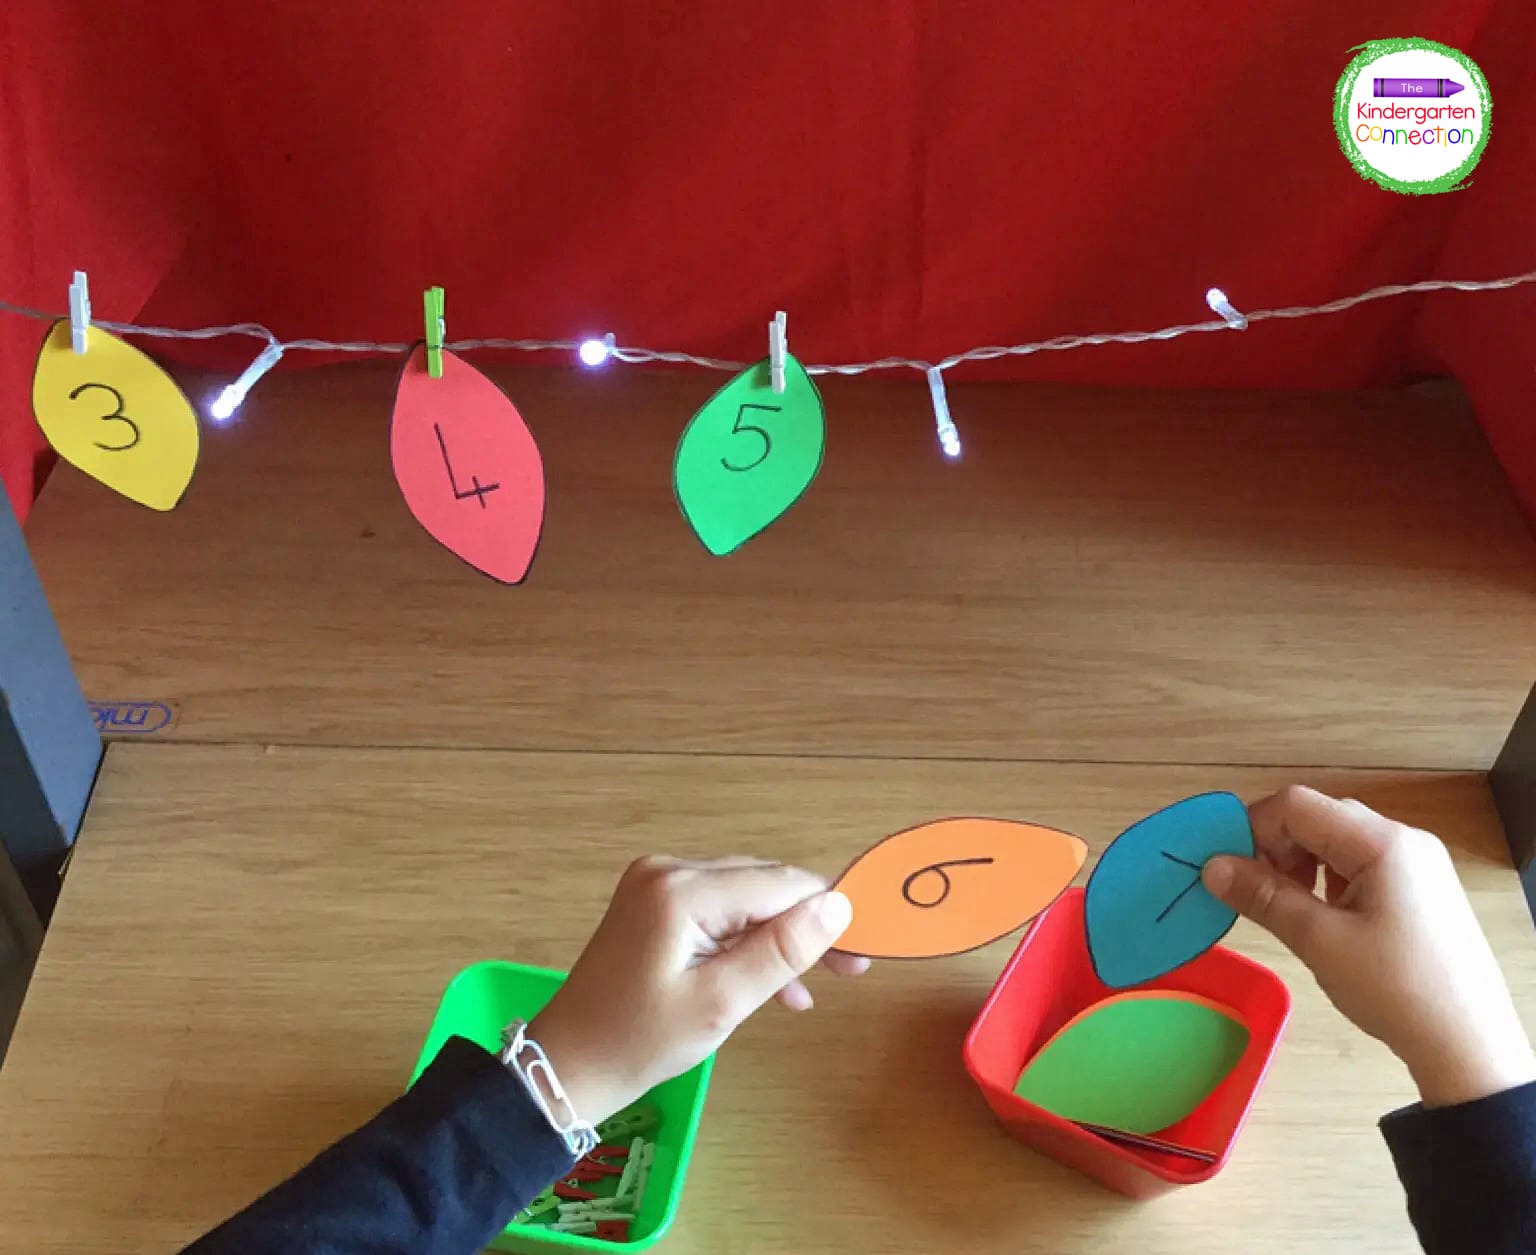 Now, clip your first light bulb onto the string. Find the next number and clip it on too.